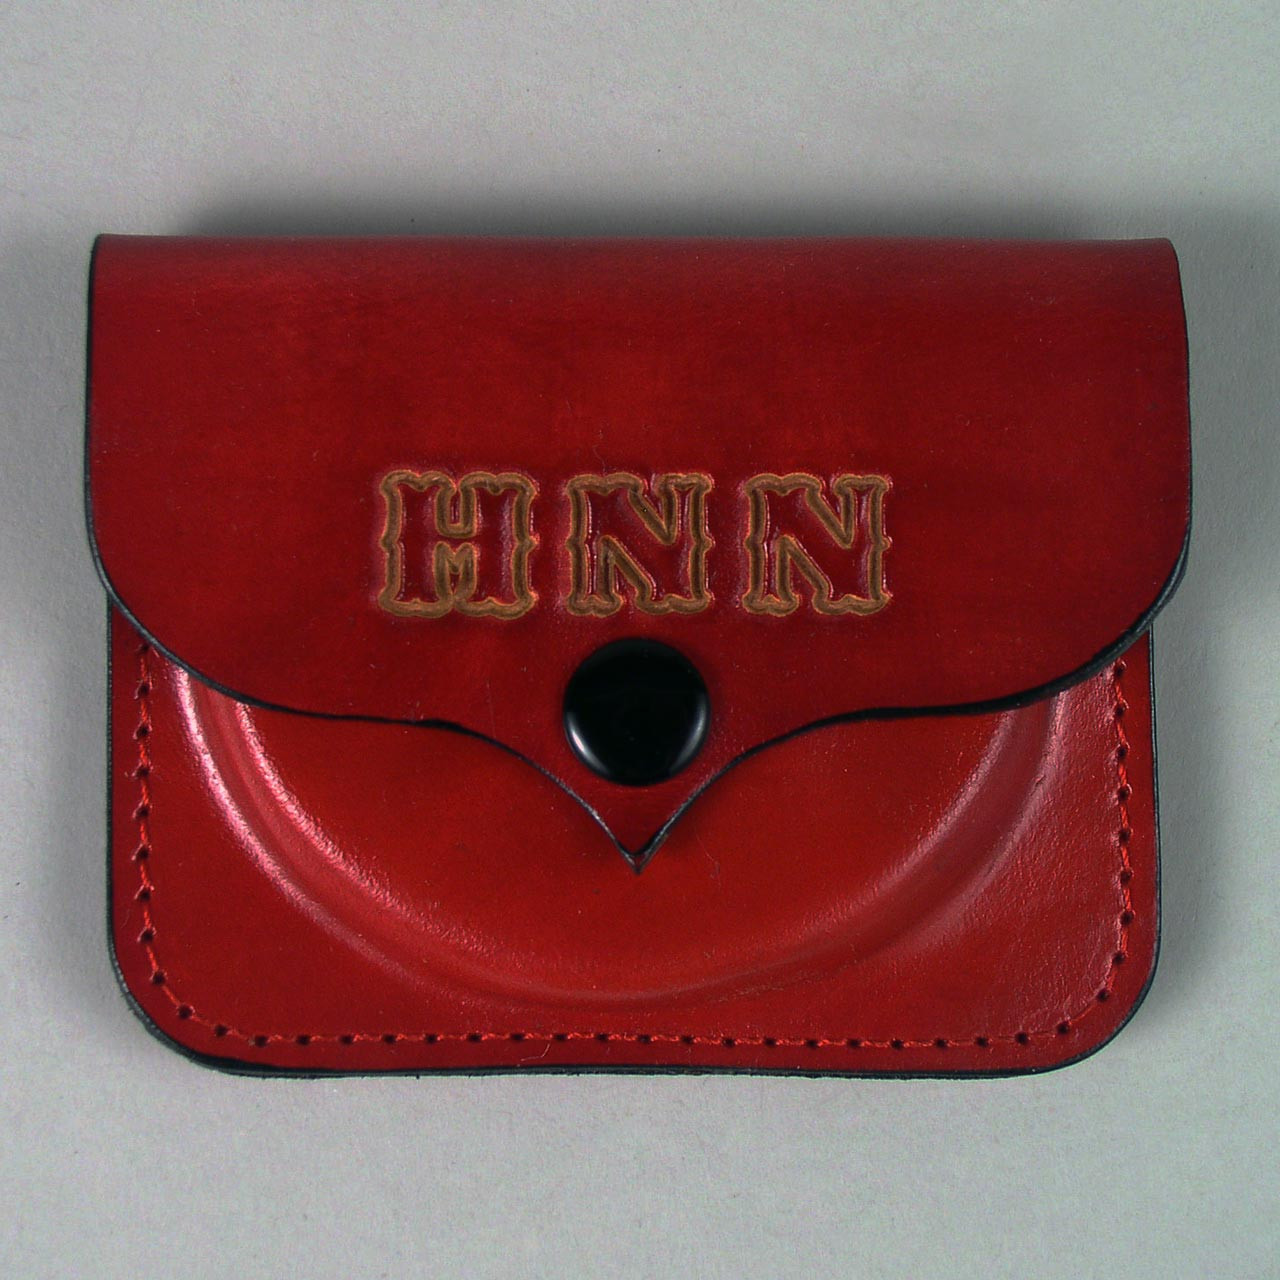 Molded Small Leather Change Purse - Leathersmith Designs Inc.